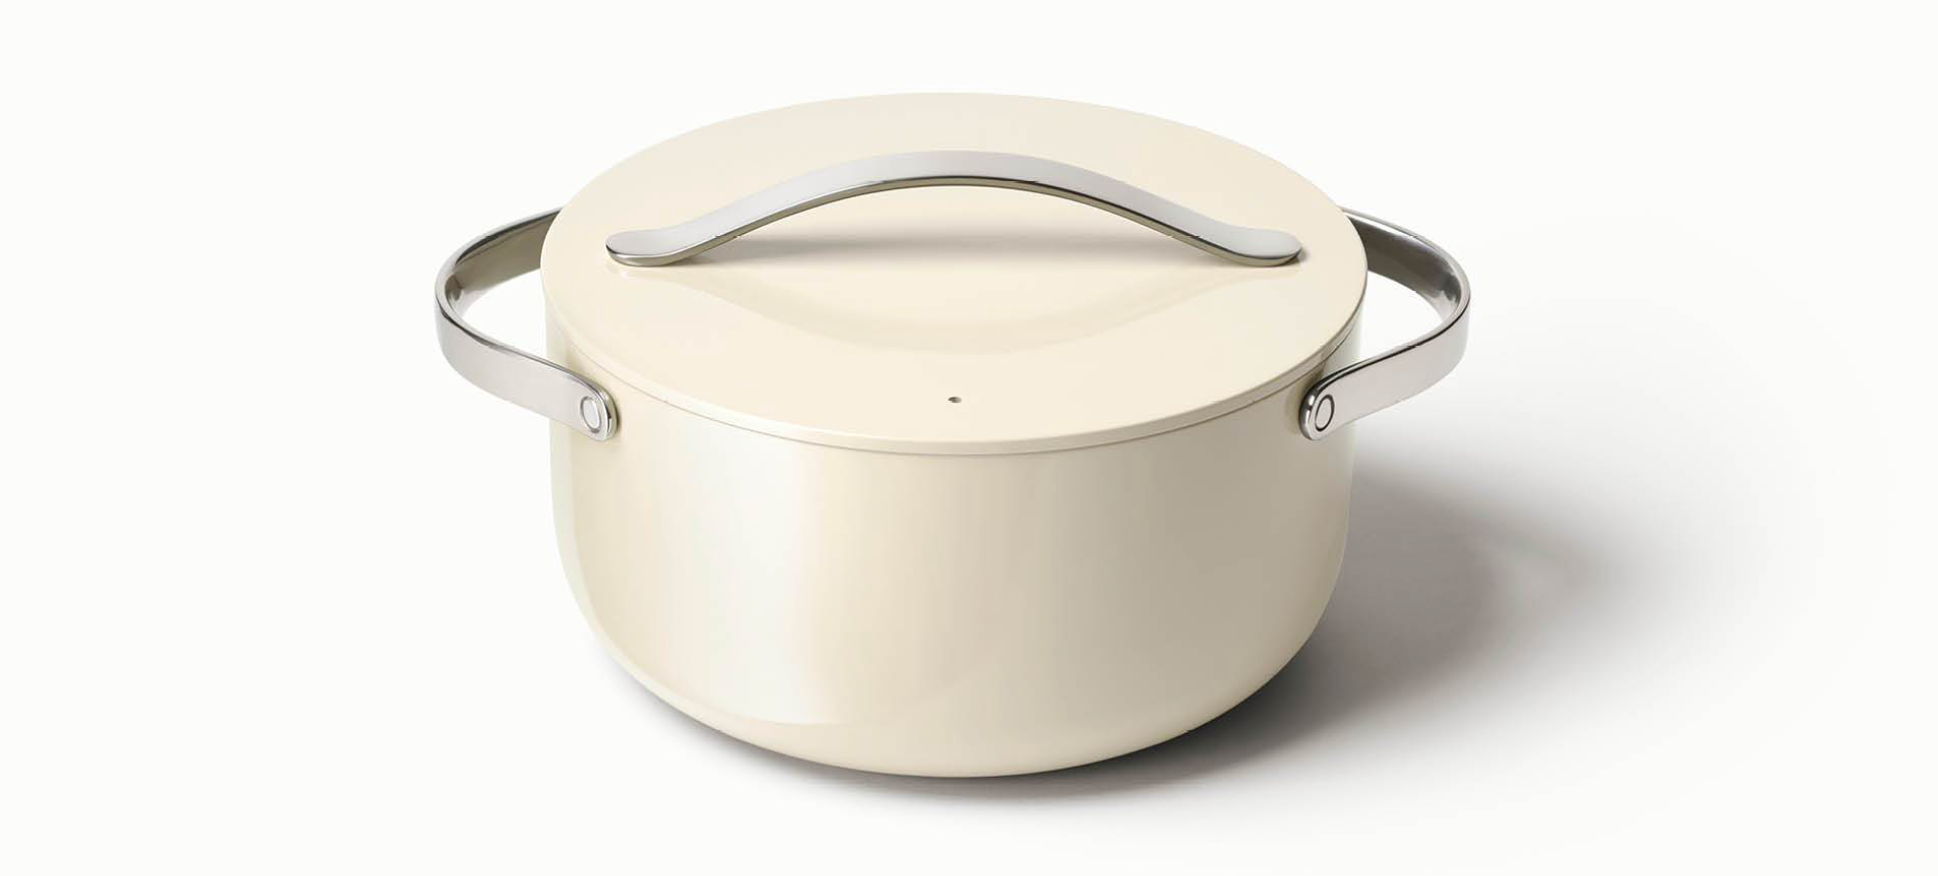 Caraway Dutch Oven Mother's Day Gift Ideas